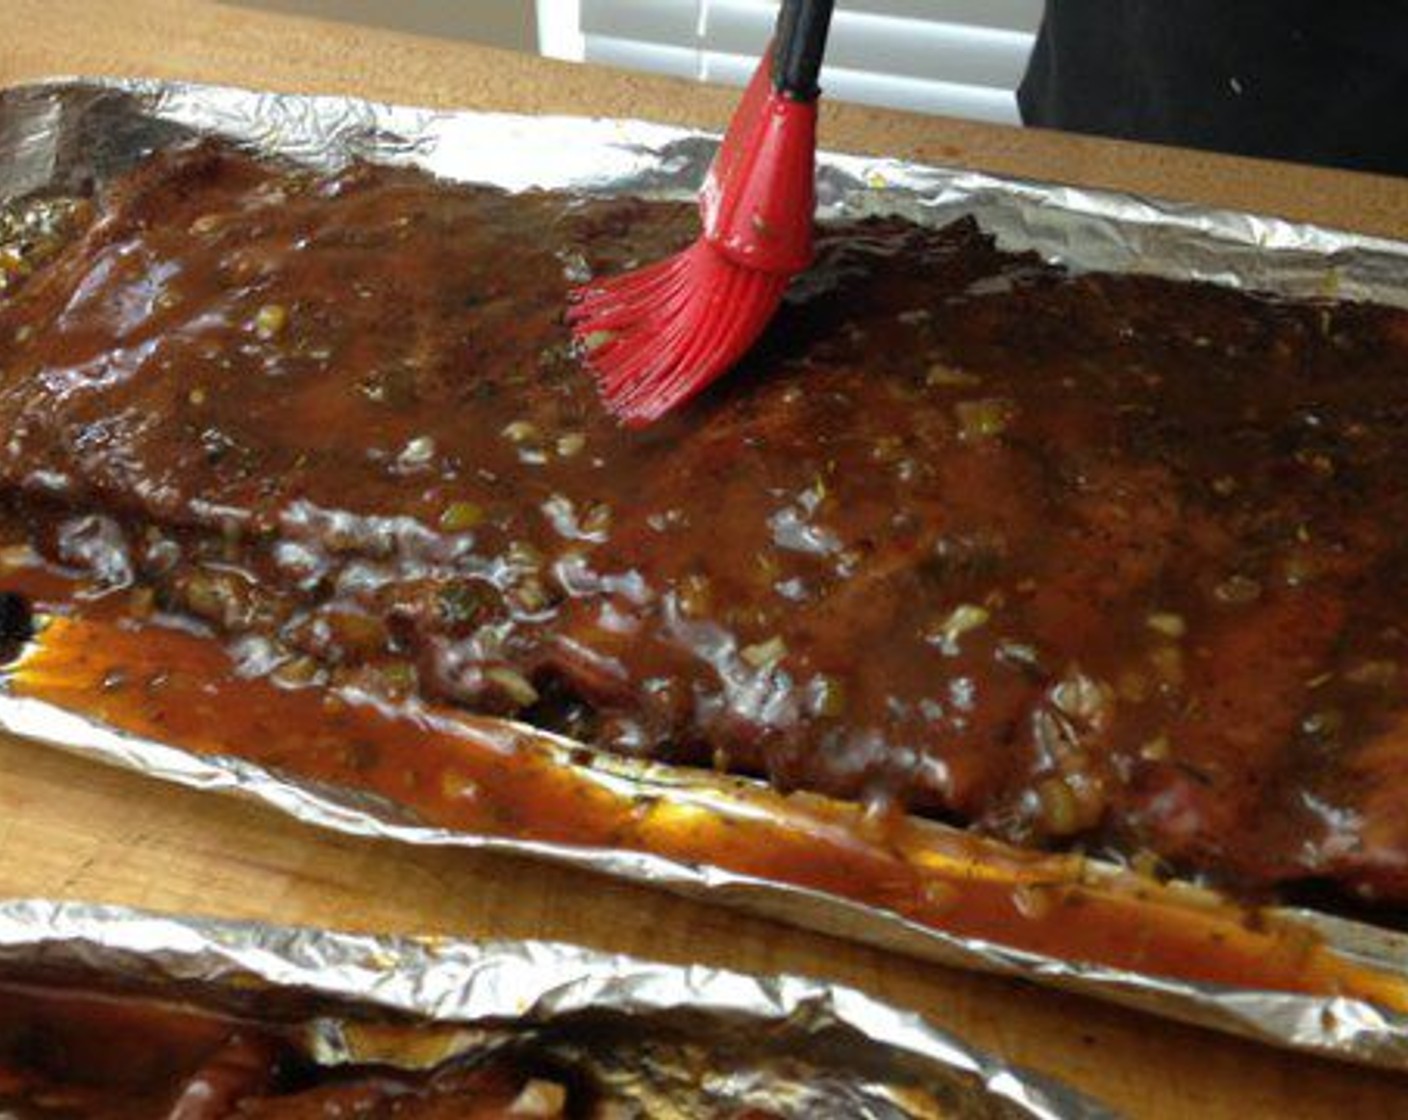 step 10 Now that the Jerk Style Spare Ribs are tender, bring both racks inside and carefully drain the liquid out of the foil. Fold the foil into a tray/boat shape around the ribs. This step makes it easier to transfer the ribs back to the smoker for a final glaze.